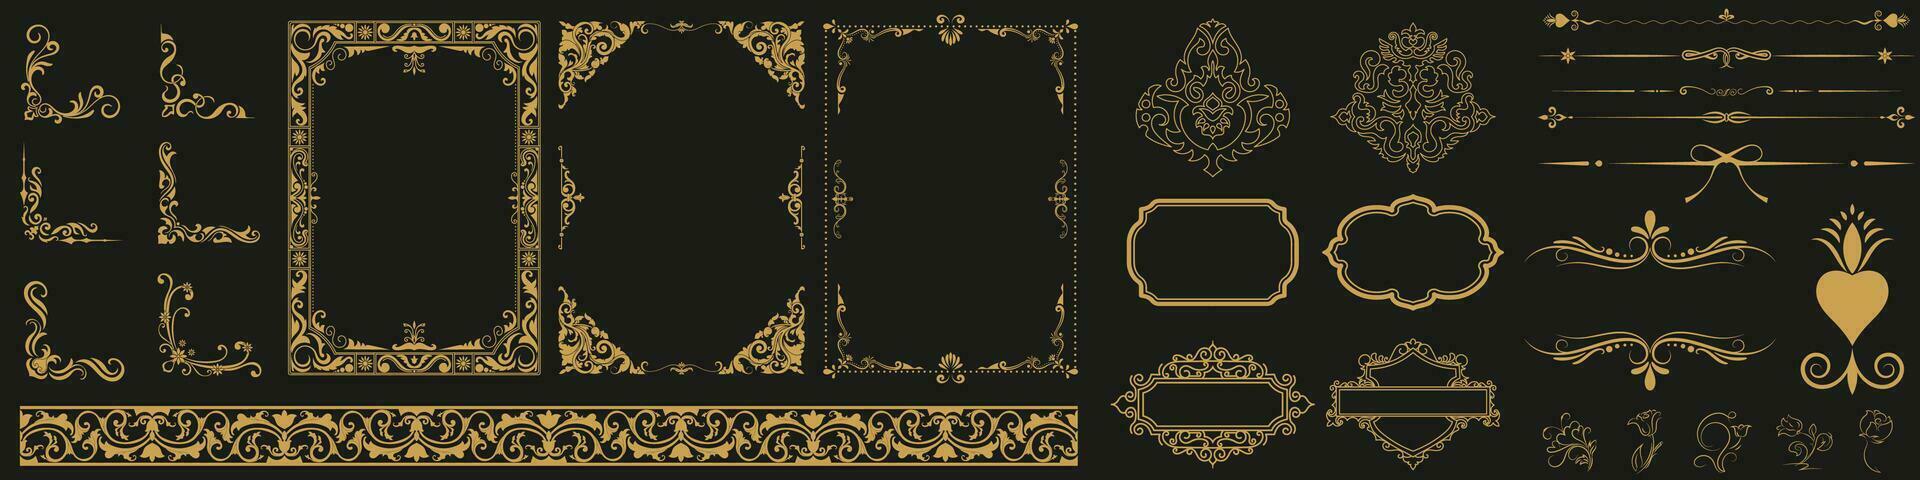 Golden vintage set includes decorative paper frames, text boxes and scrolling floral borders using rose gold line design with vintage corner tapestry borders. vector